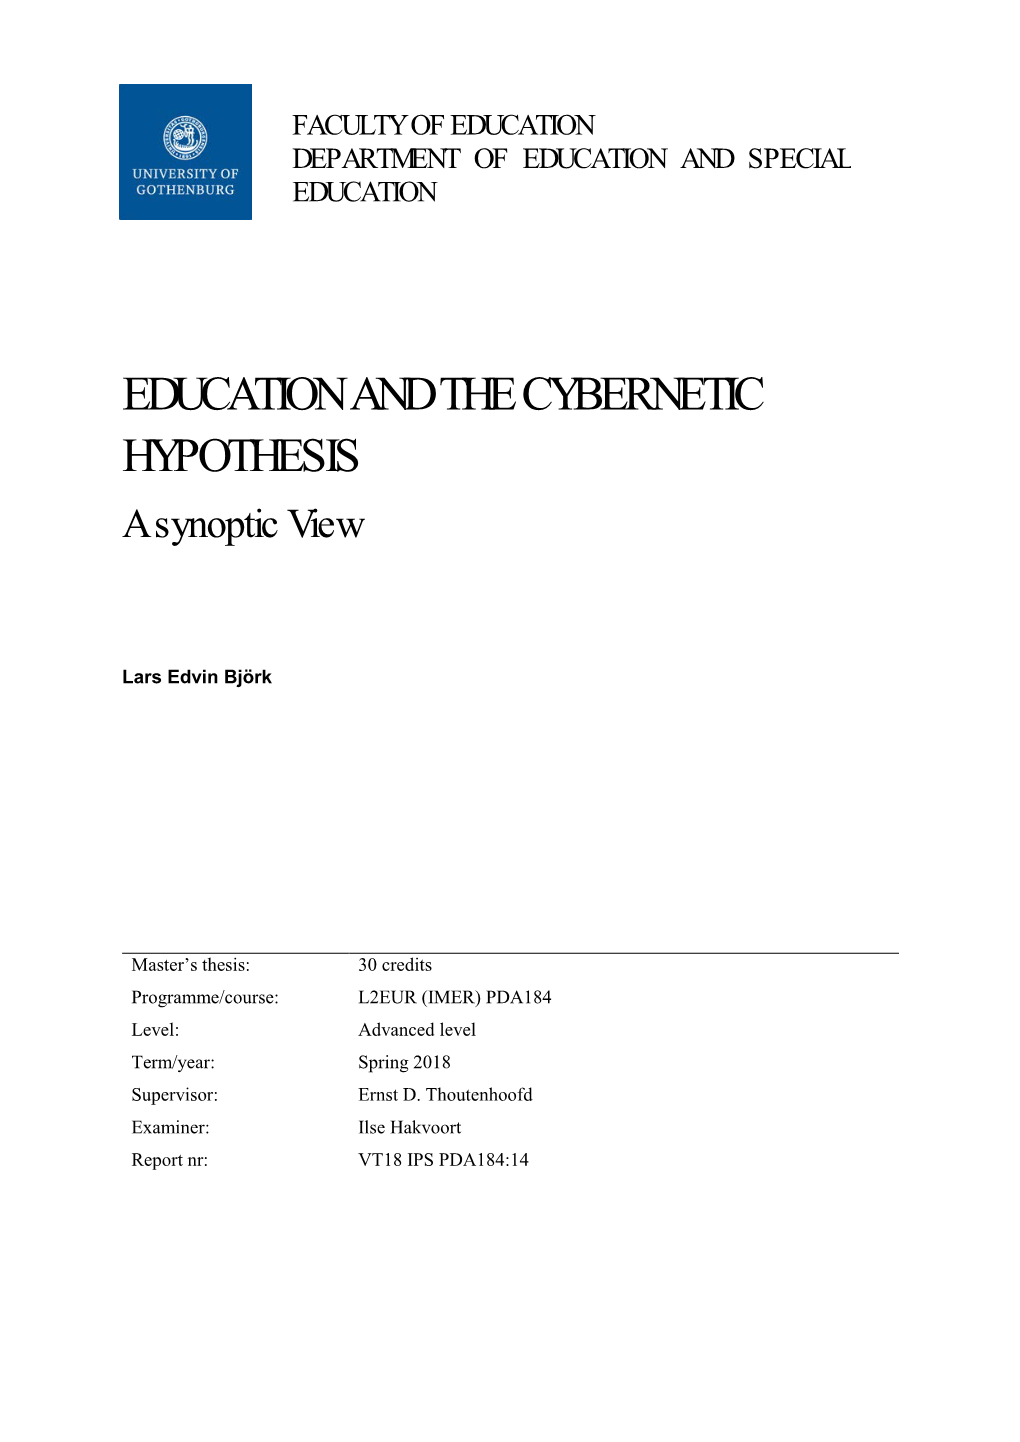 EDUCATION and the CYBERNETIC HYPOTHESIS a Synoptic View